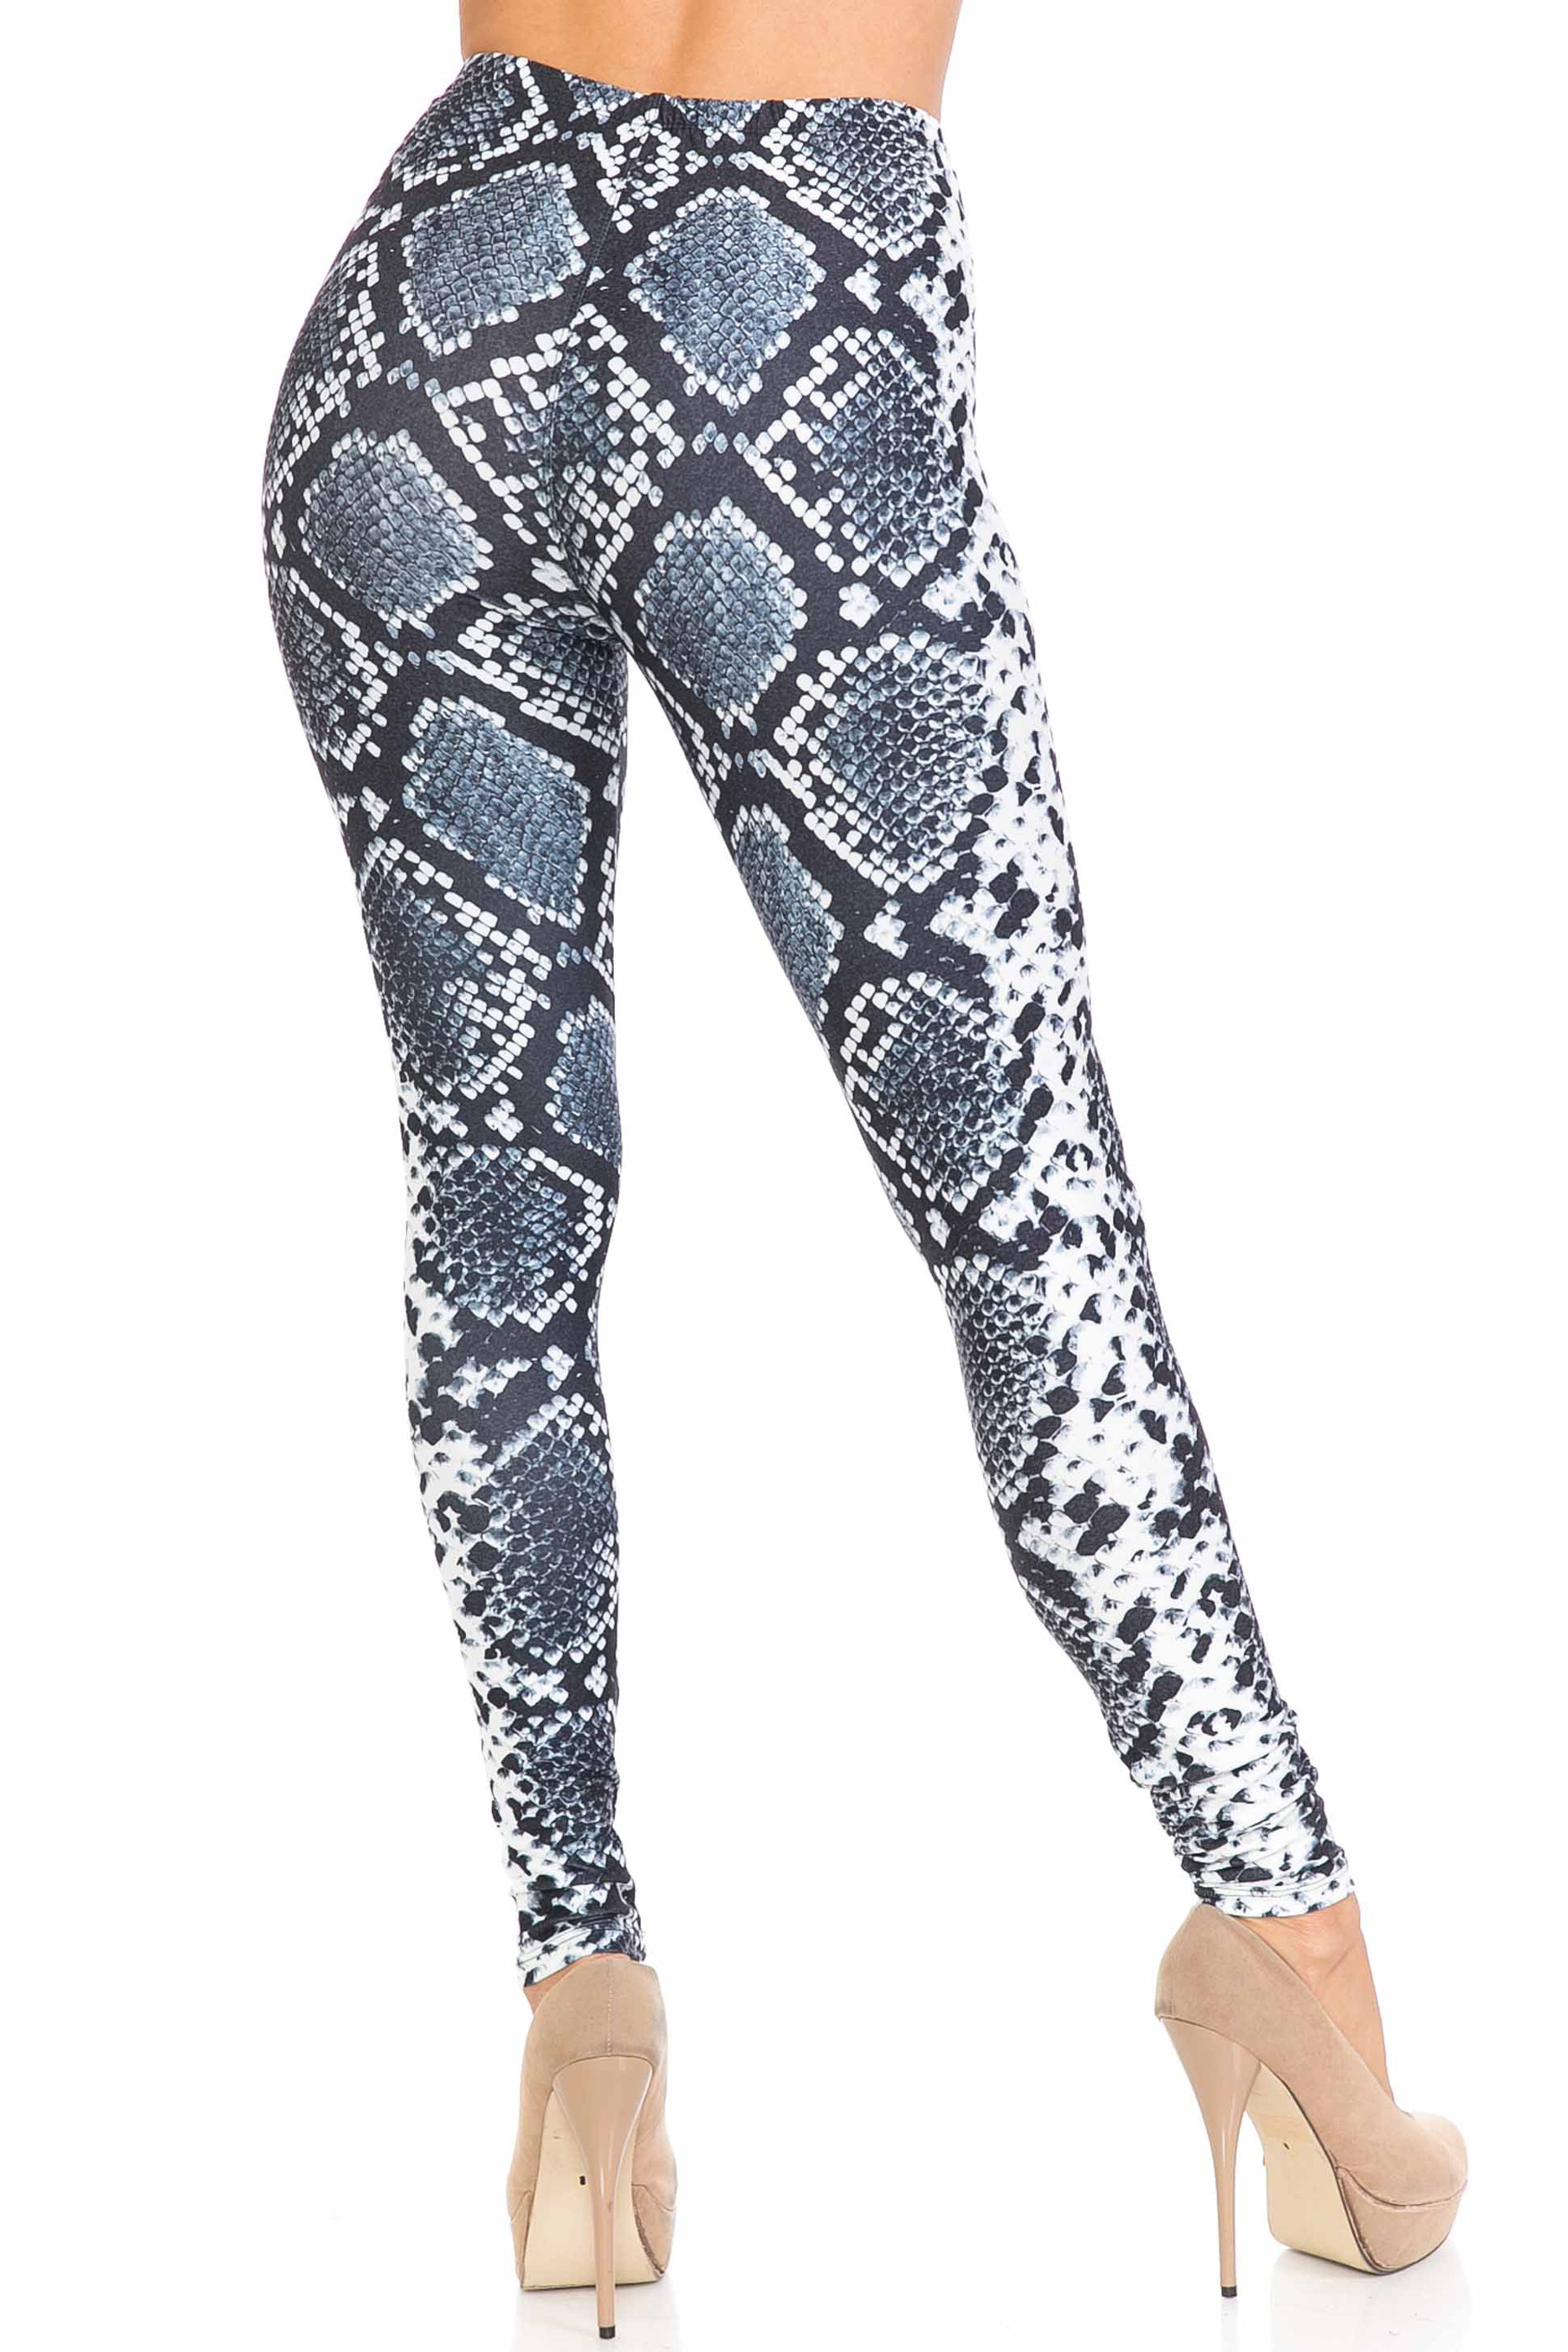 Back view of our sexy Creamy Soft Steel Blue Boa Extra Plus Size Leggings - 3X-5X - USA Fashion™ with a sassy all over reptile print.